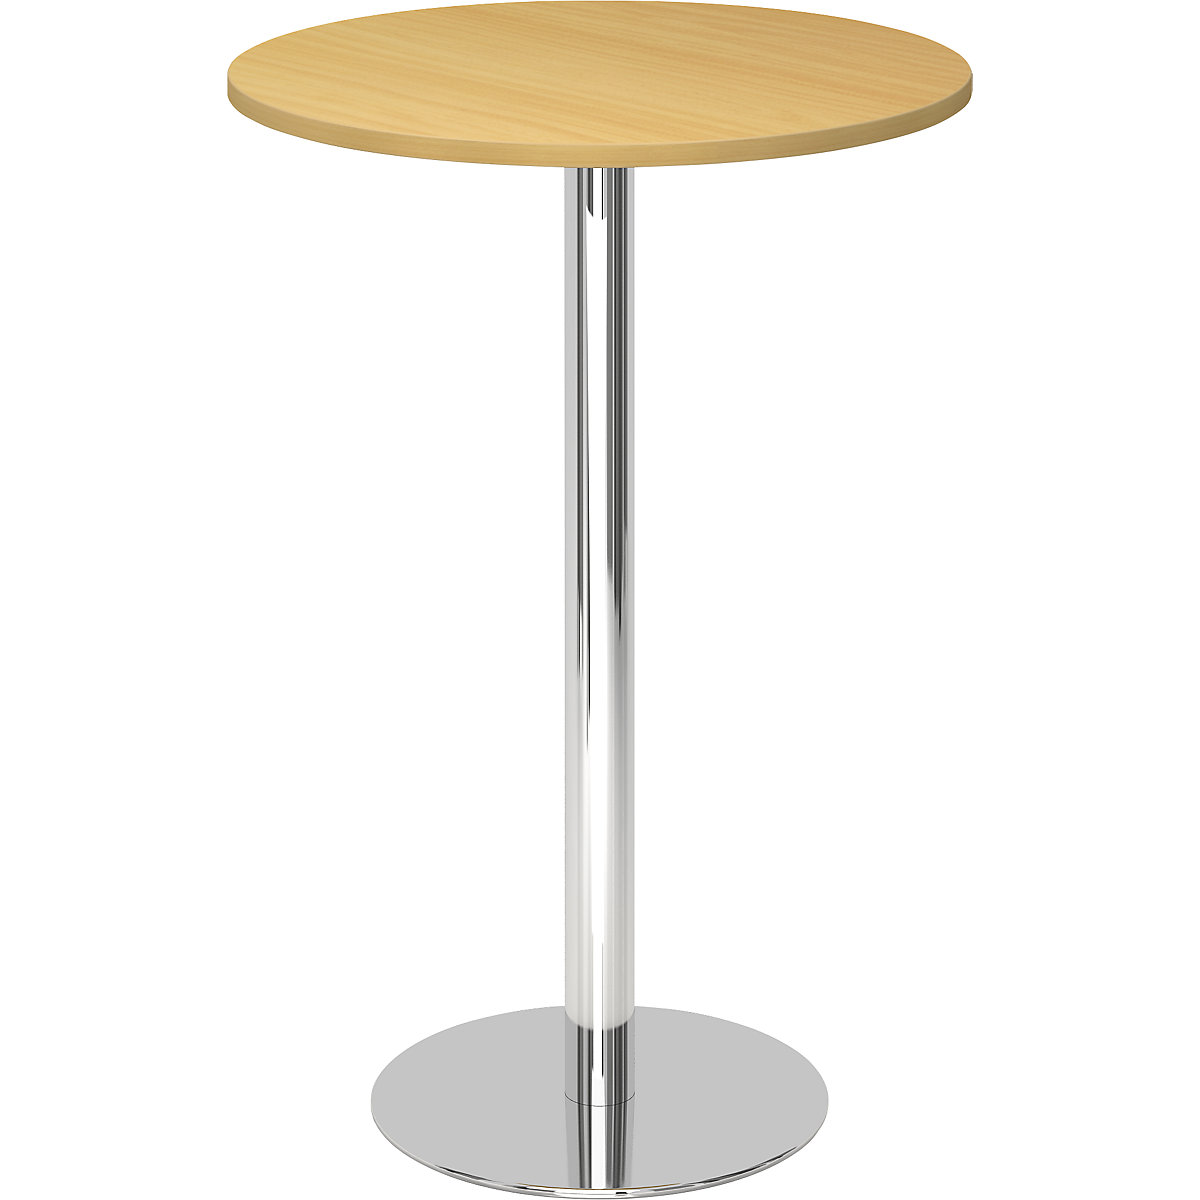 Pedestal table, Ø 800 mm, 1116 mm high, chrome plated frame, tabletop in beech finish-7